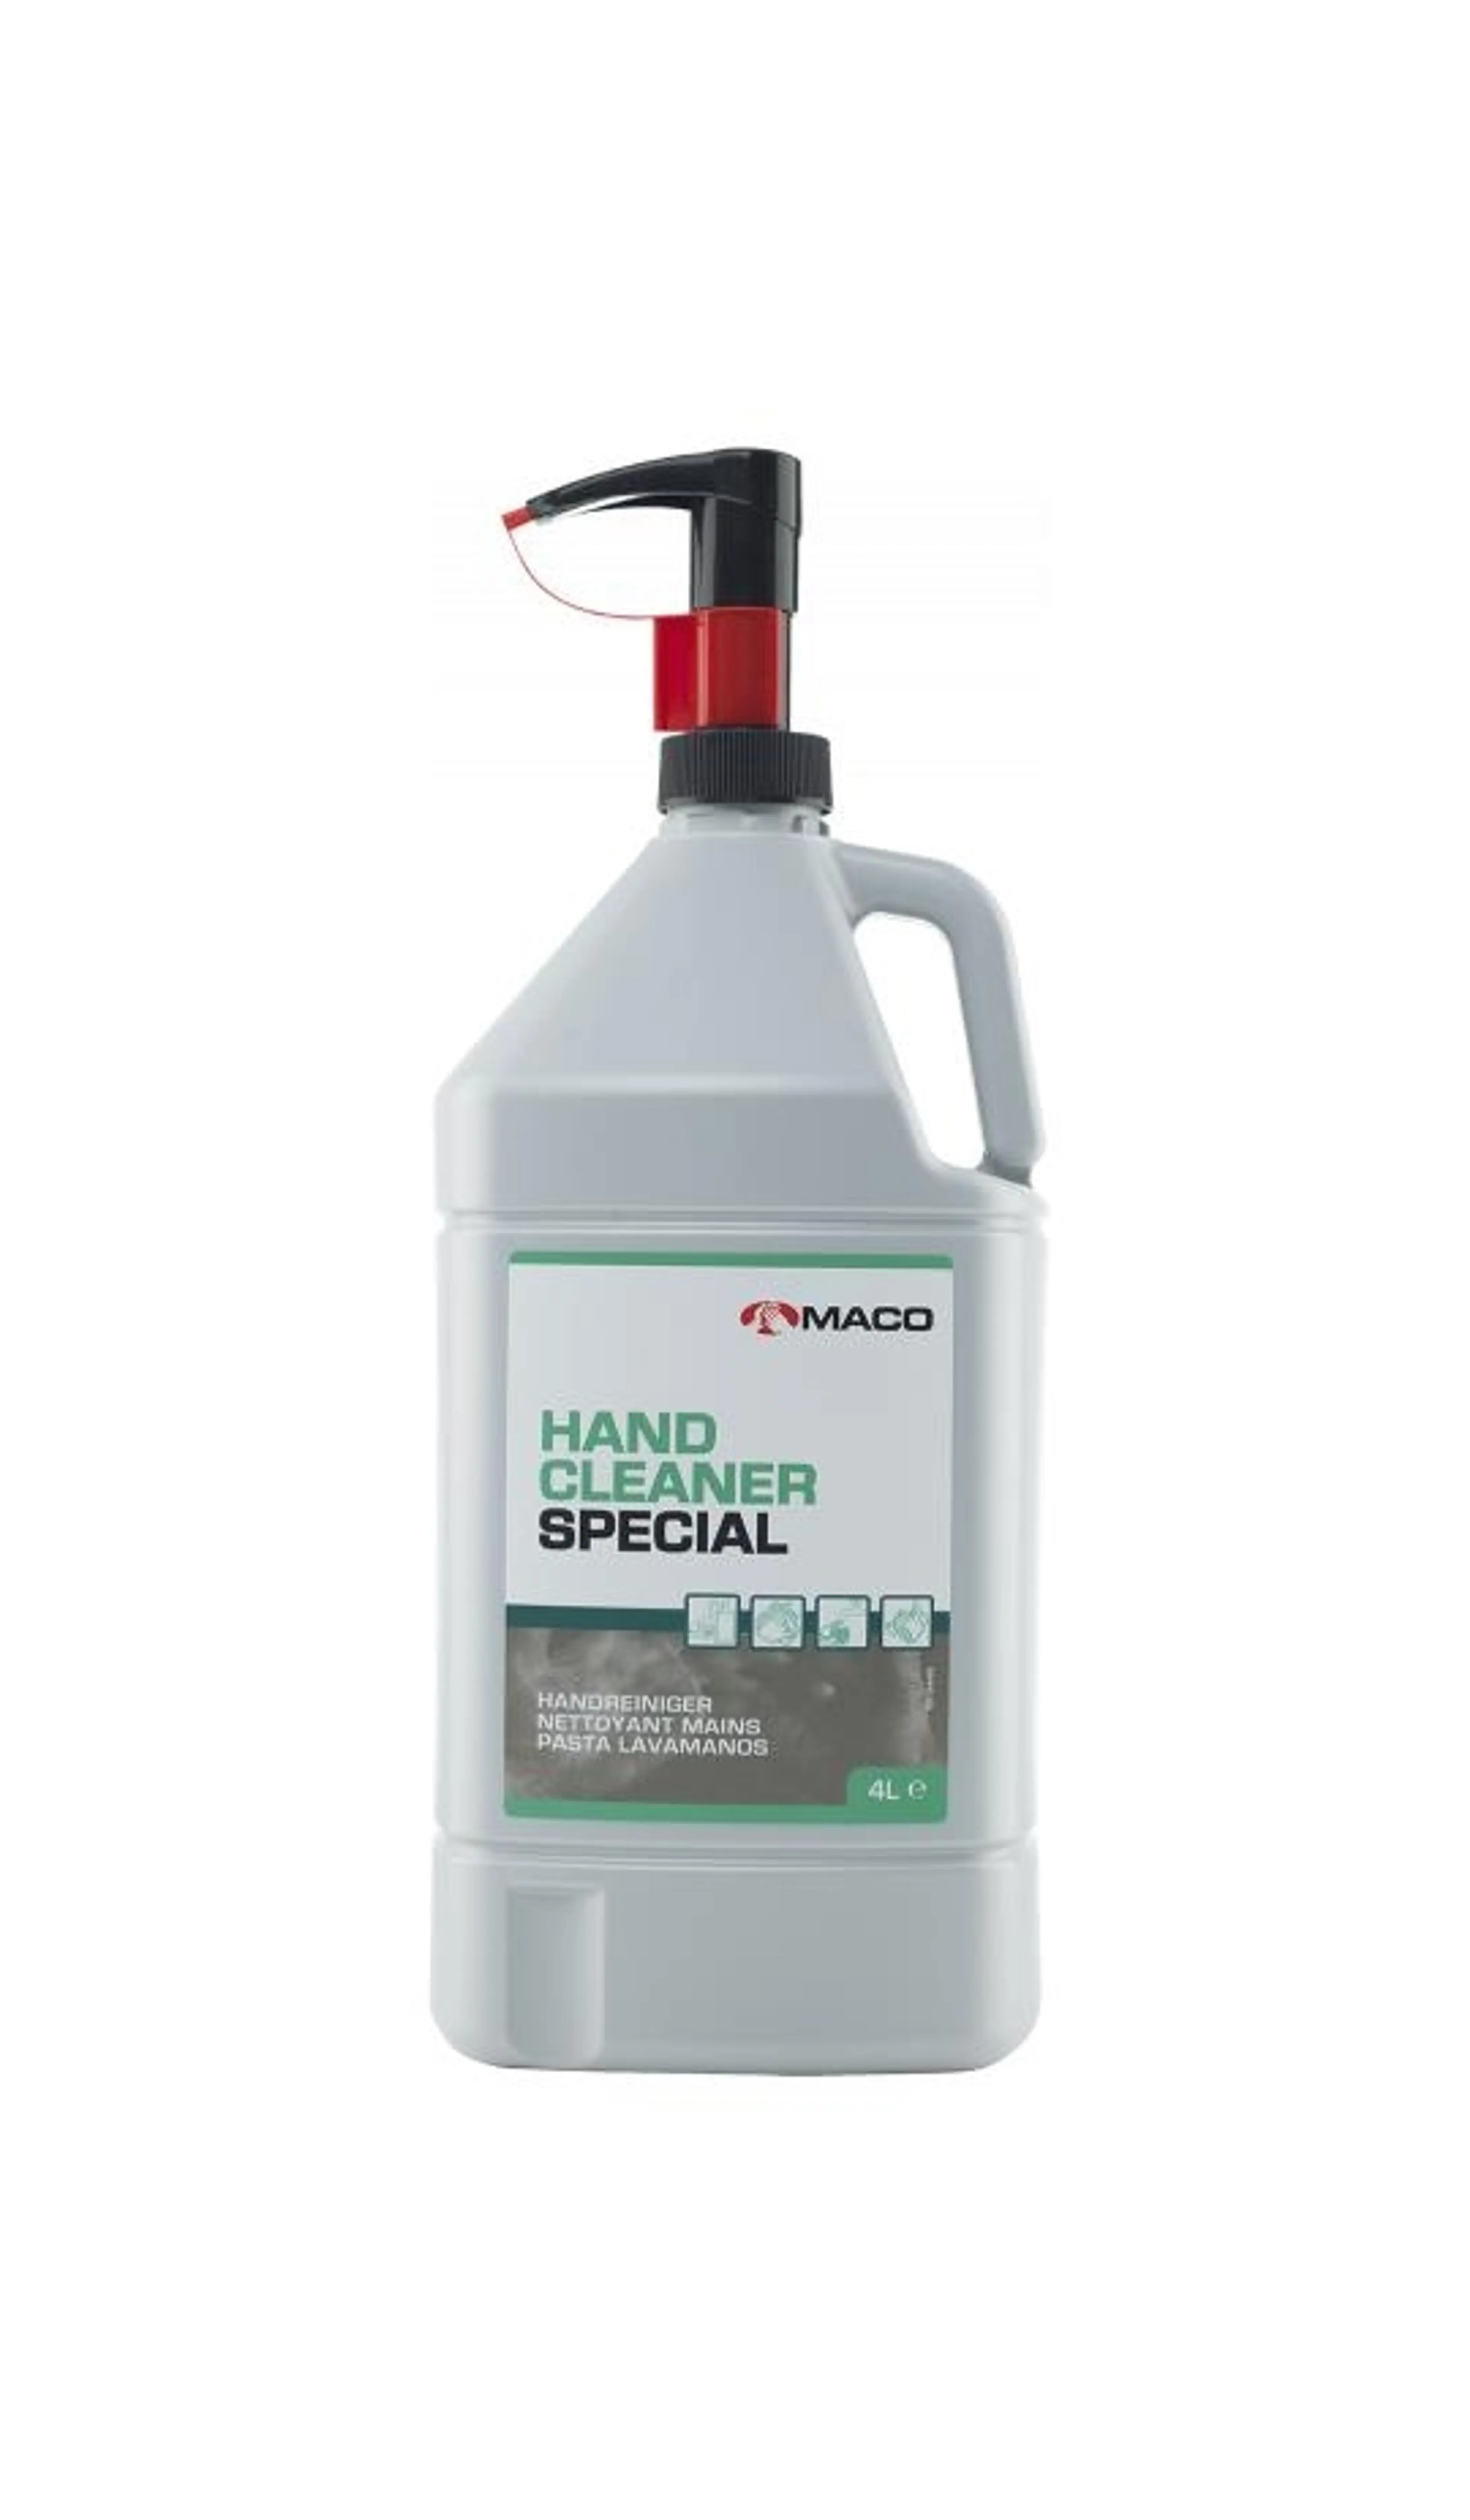 HANDCLEANER SPECIAL 4L CON BOMBA